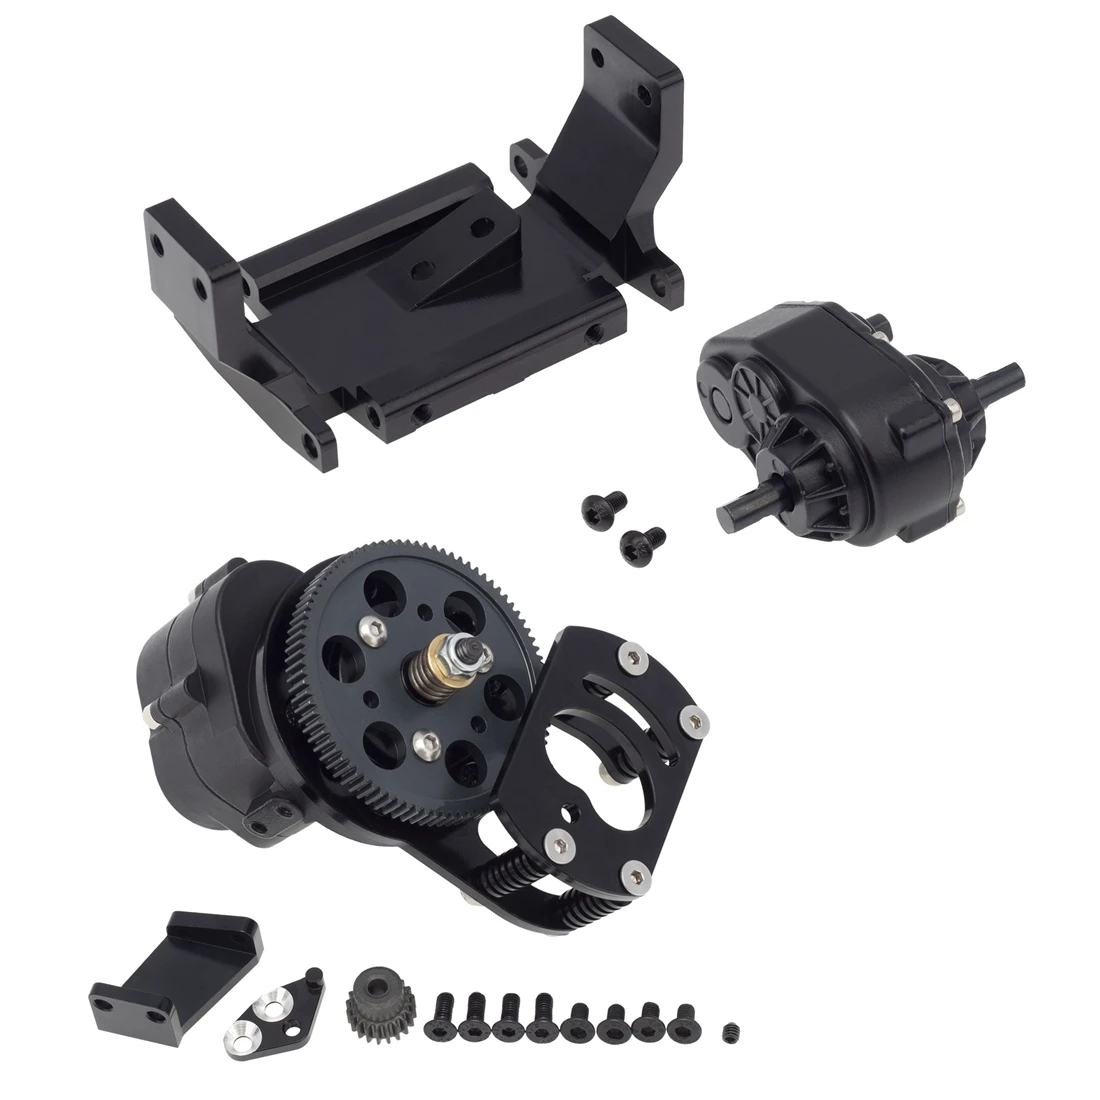 

Metal R3 Single Speed Gearbox and Transfer Case Set for RC4WD D90 Gelande II D110 G2 FJ40 1/10 RC Crawler Car Upgrades 1